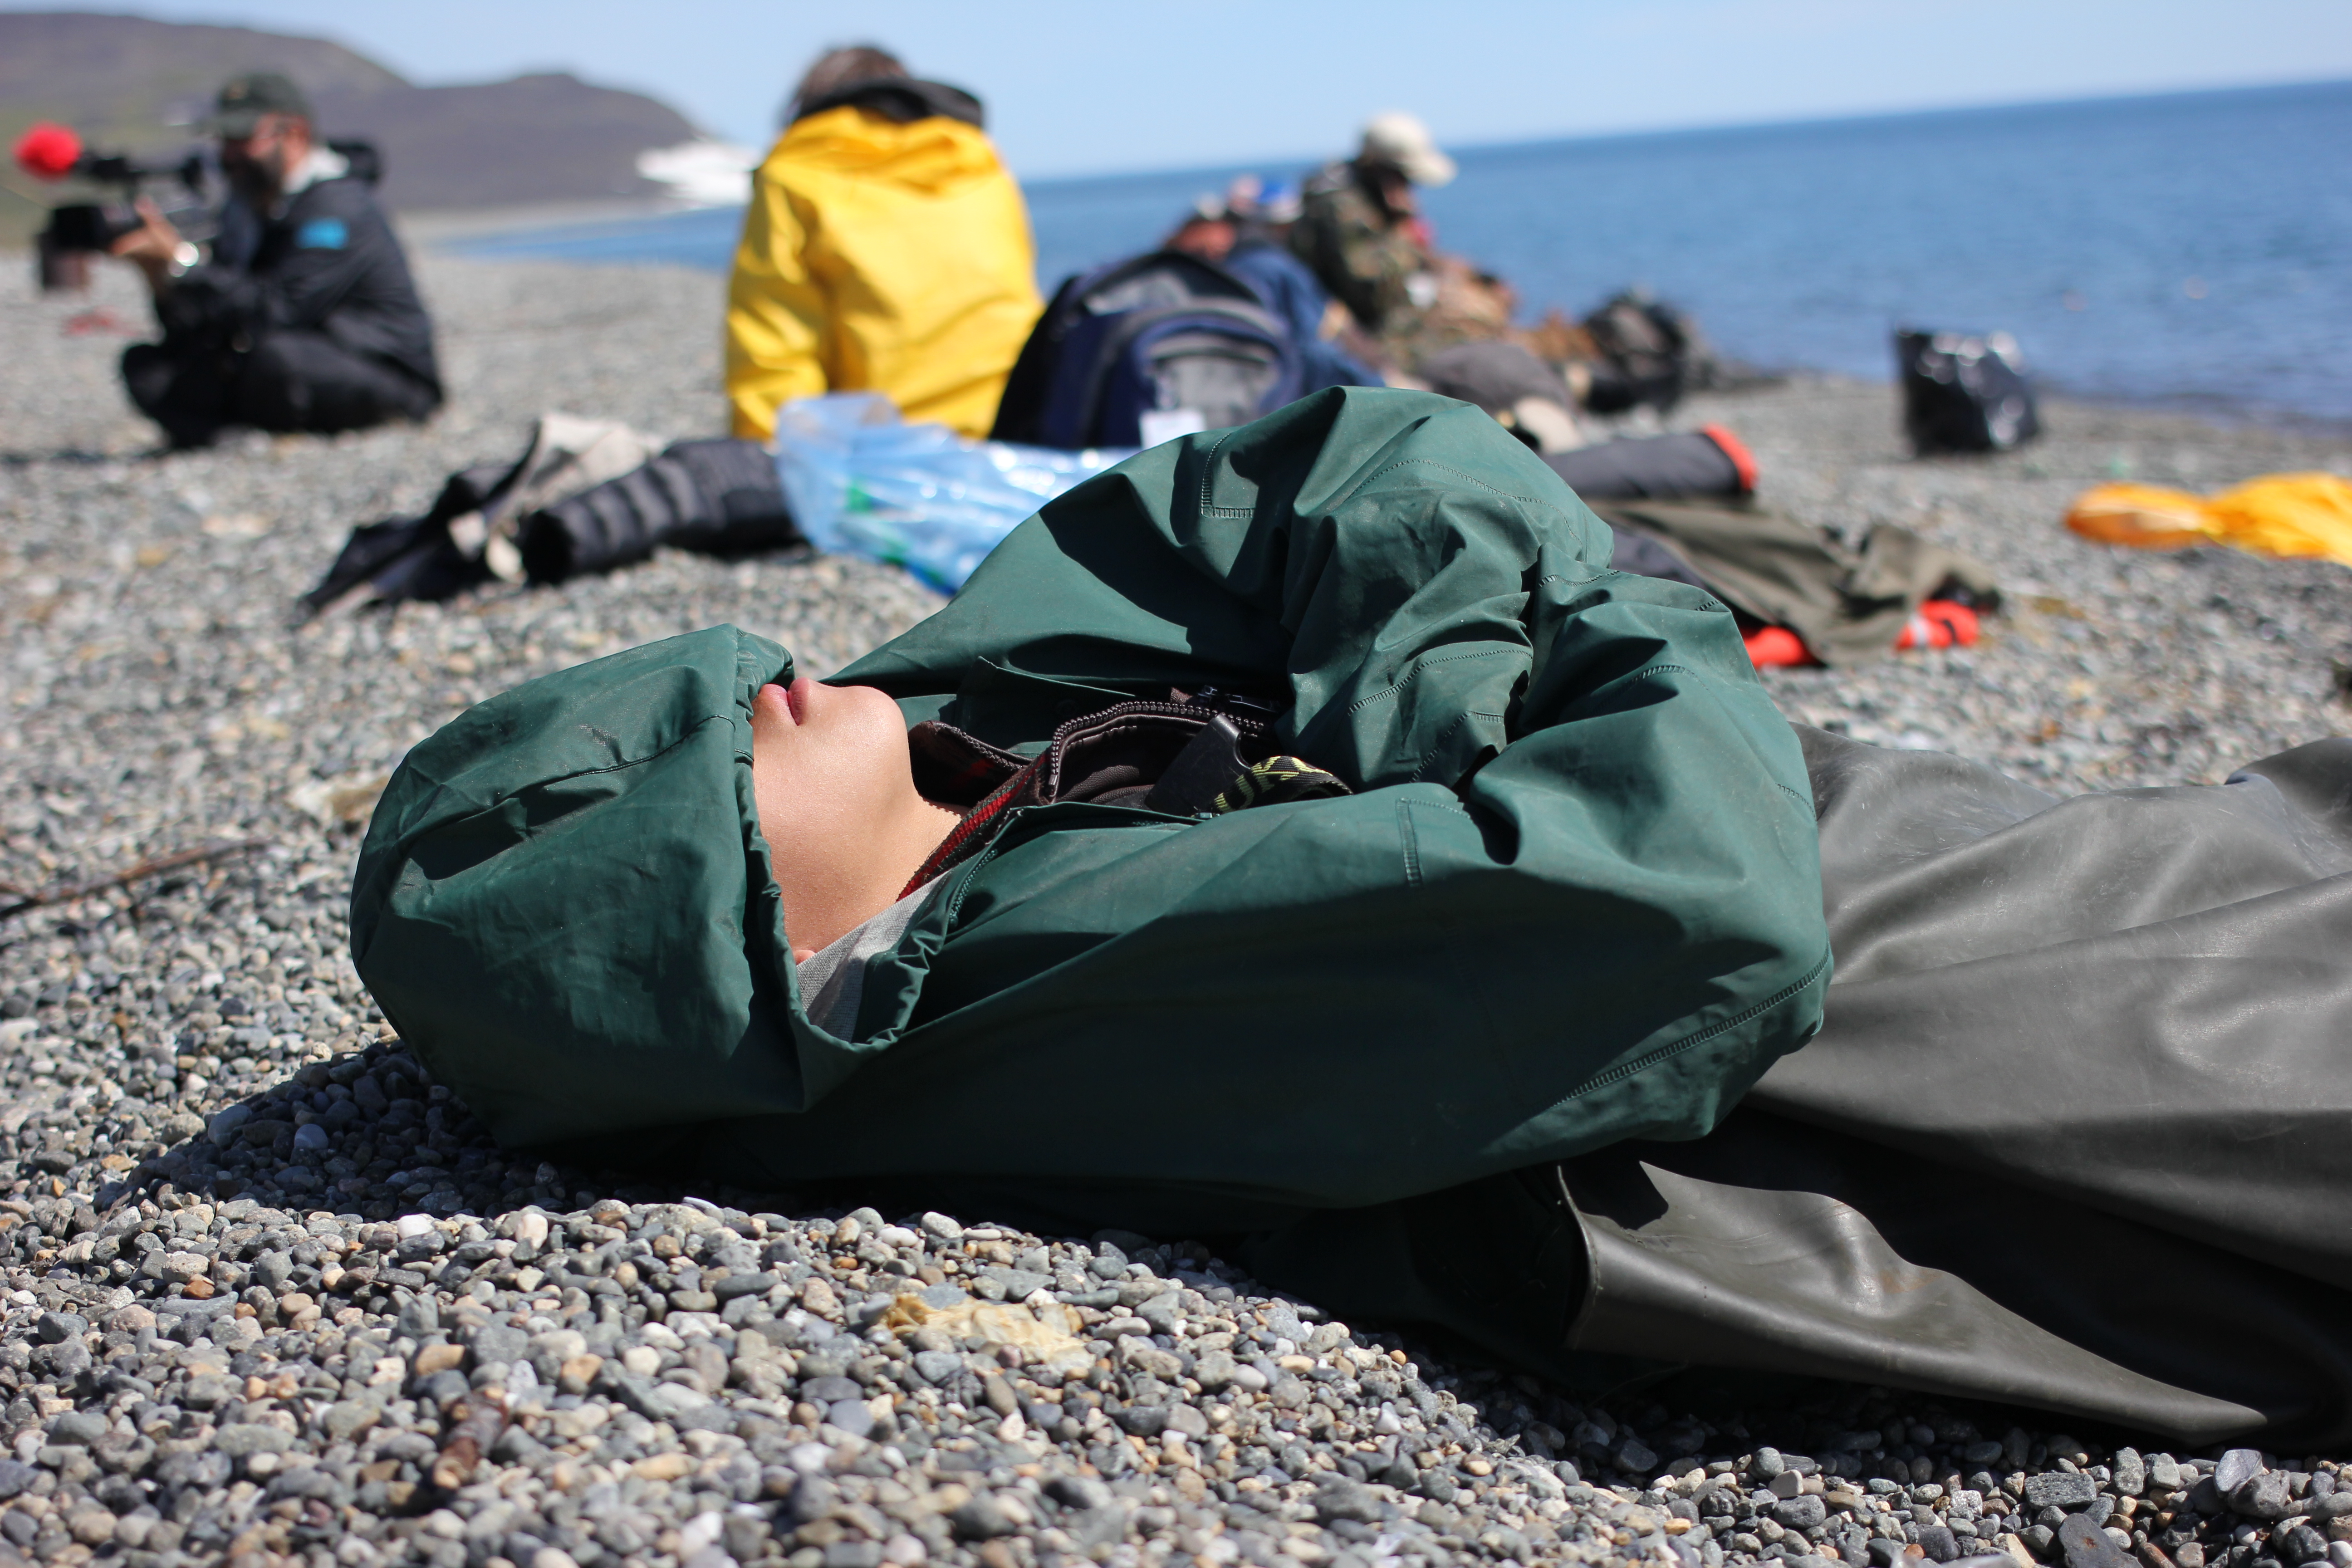 A young boat driver naps on the shore during a brief stop in Yanrakynnot, Chukotka, July 2014. While traveling the coastline, the Diomede Island Family Reunion expedition stopped frequently to check in with border guards along the way. (Kirsten Swann / Alaska Dispatch News)